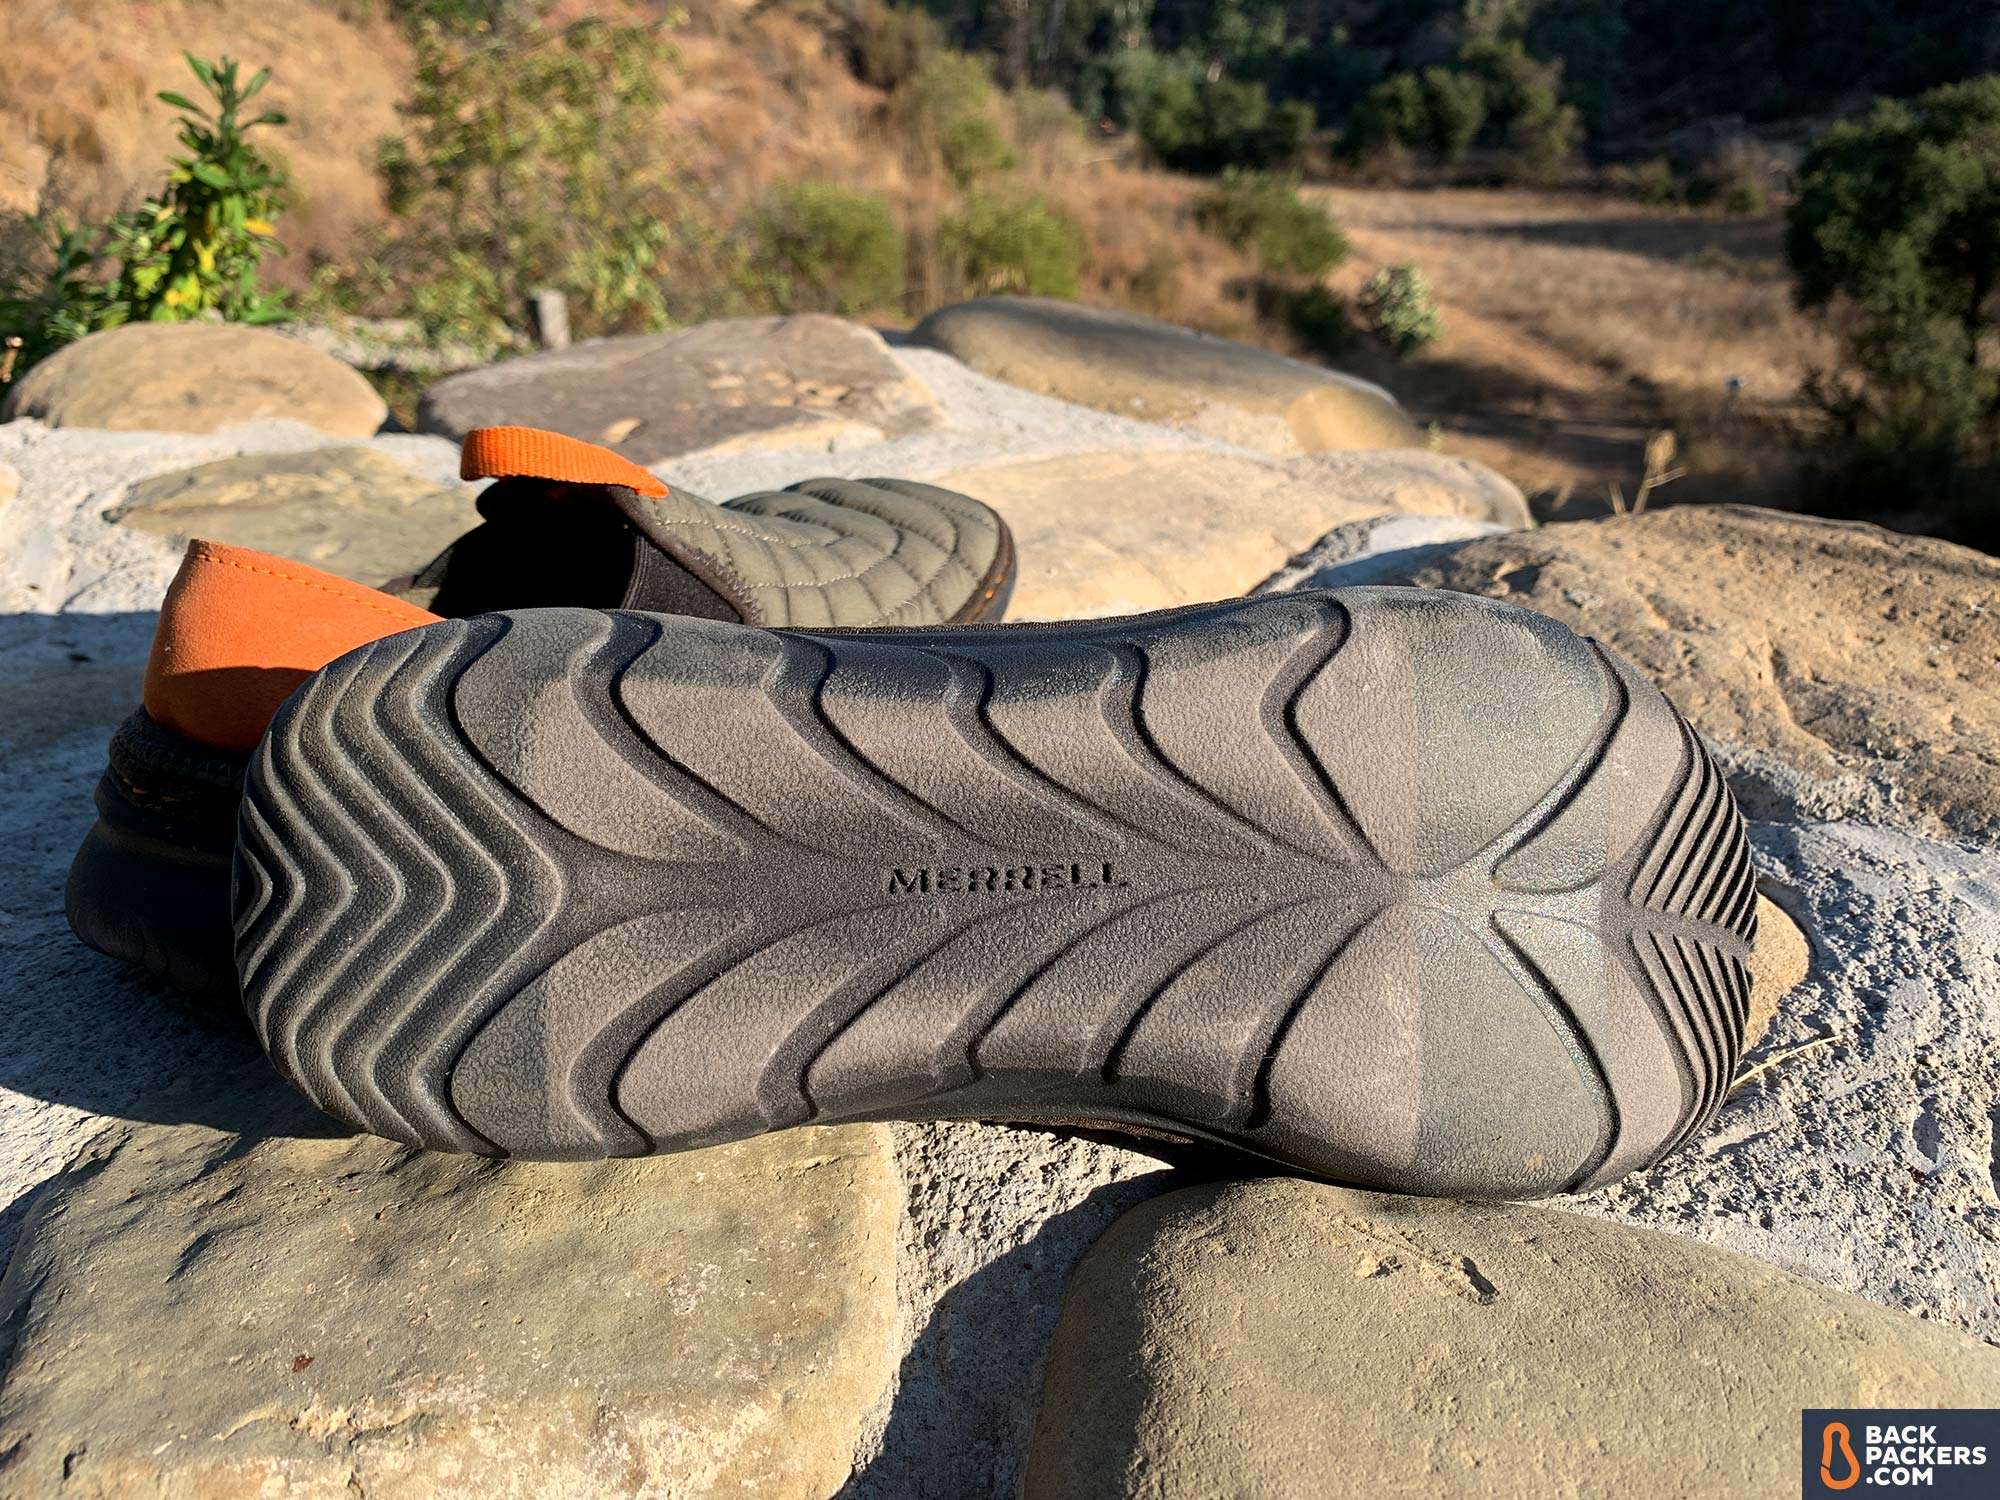 Merrell Hut Moc: Cozy, Stylish Outdoor Slippers for Home or Adventure